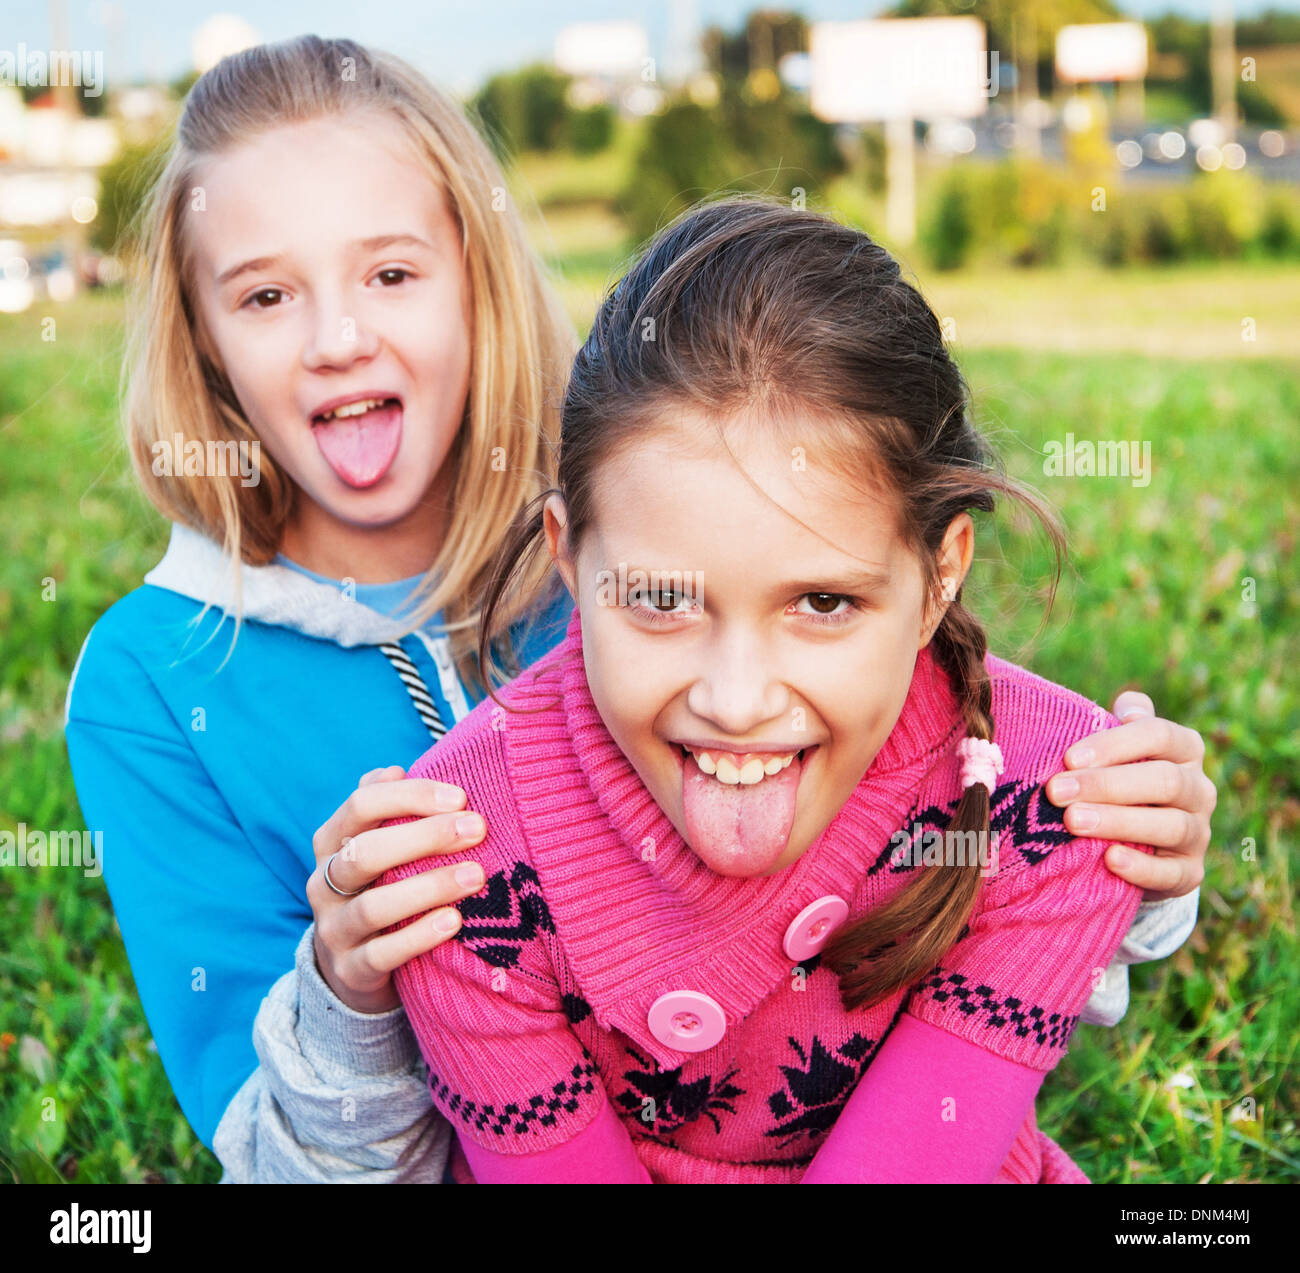 Little girls showing the tongue Stock Photo